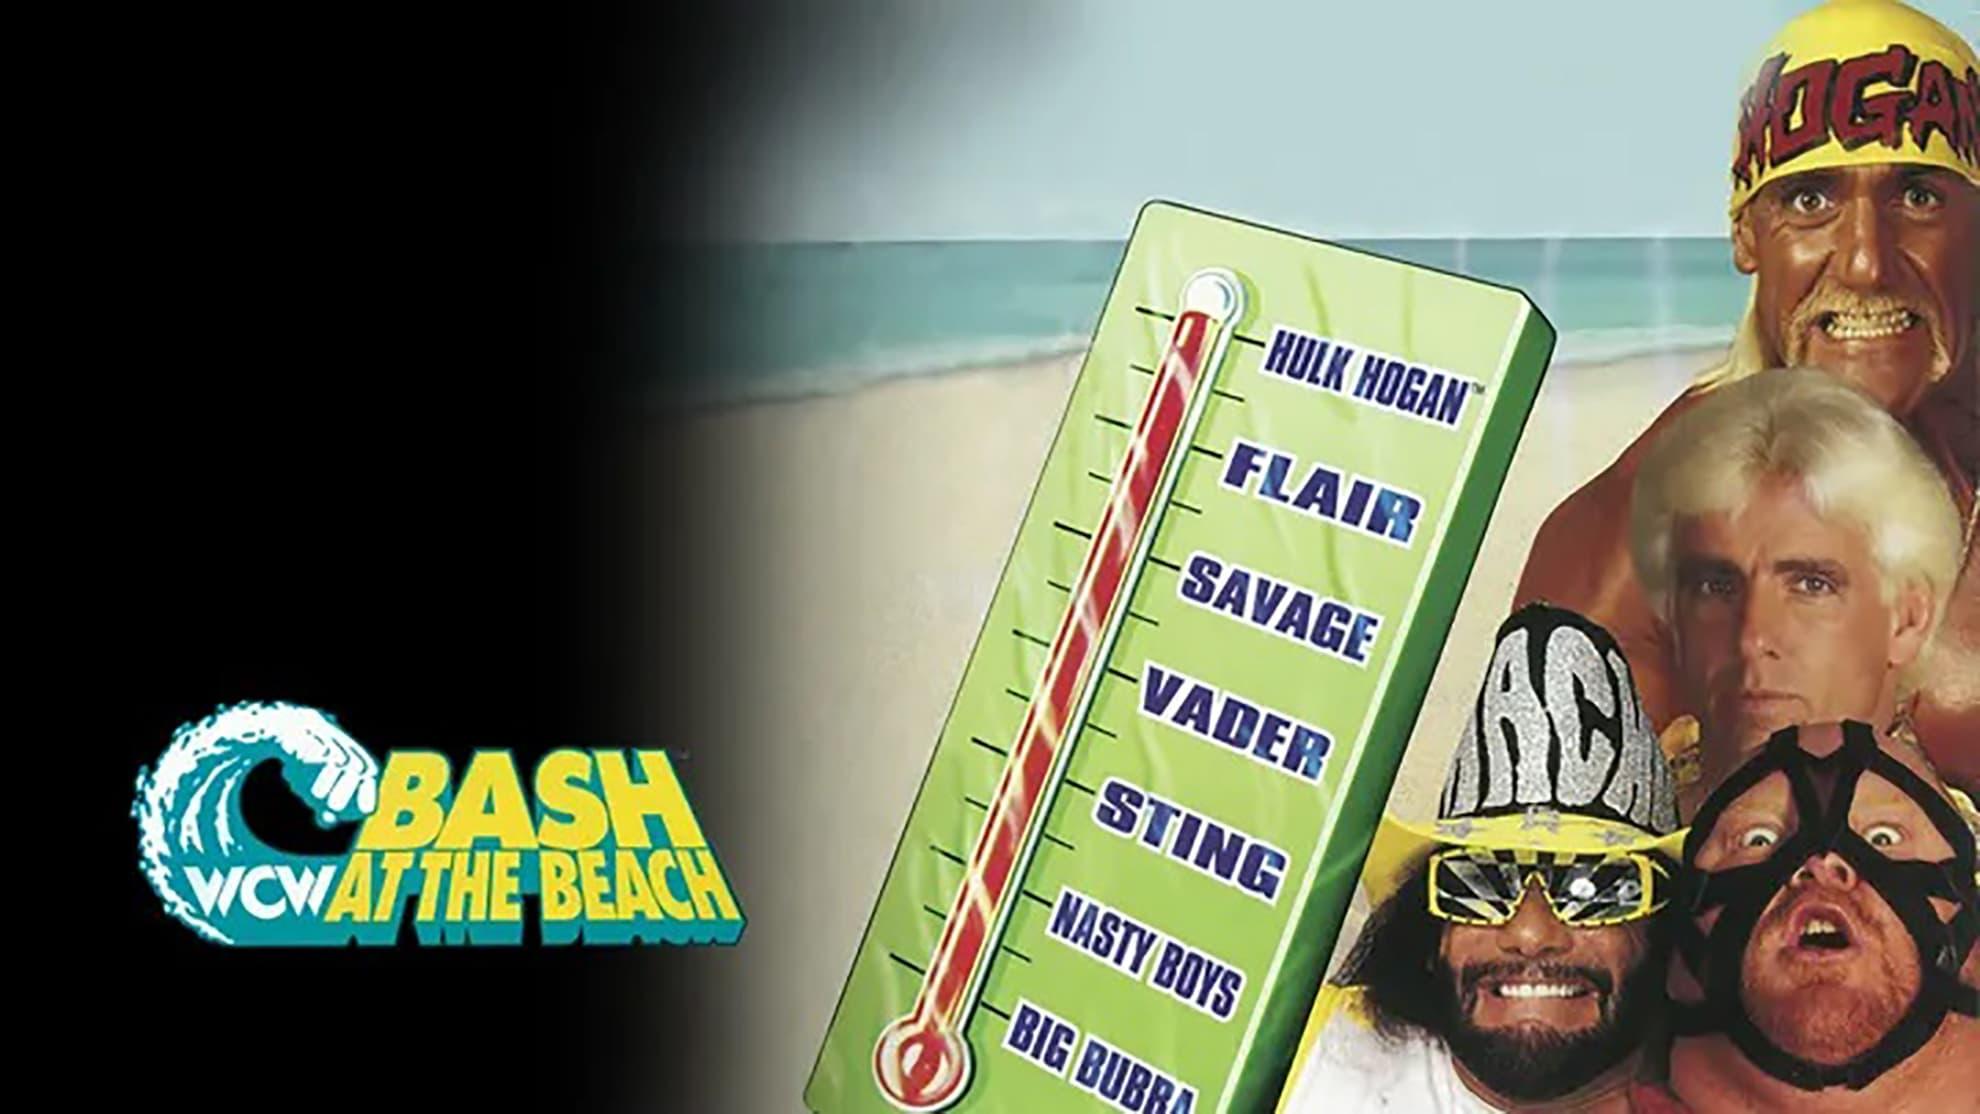 WCW Bash at the Beach 1995 backdrop